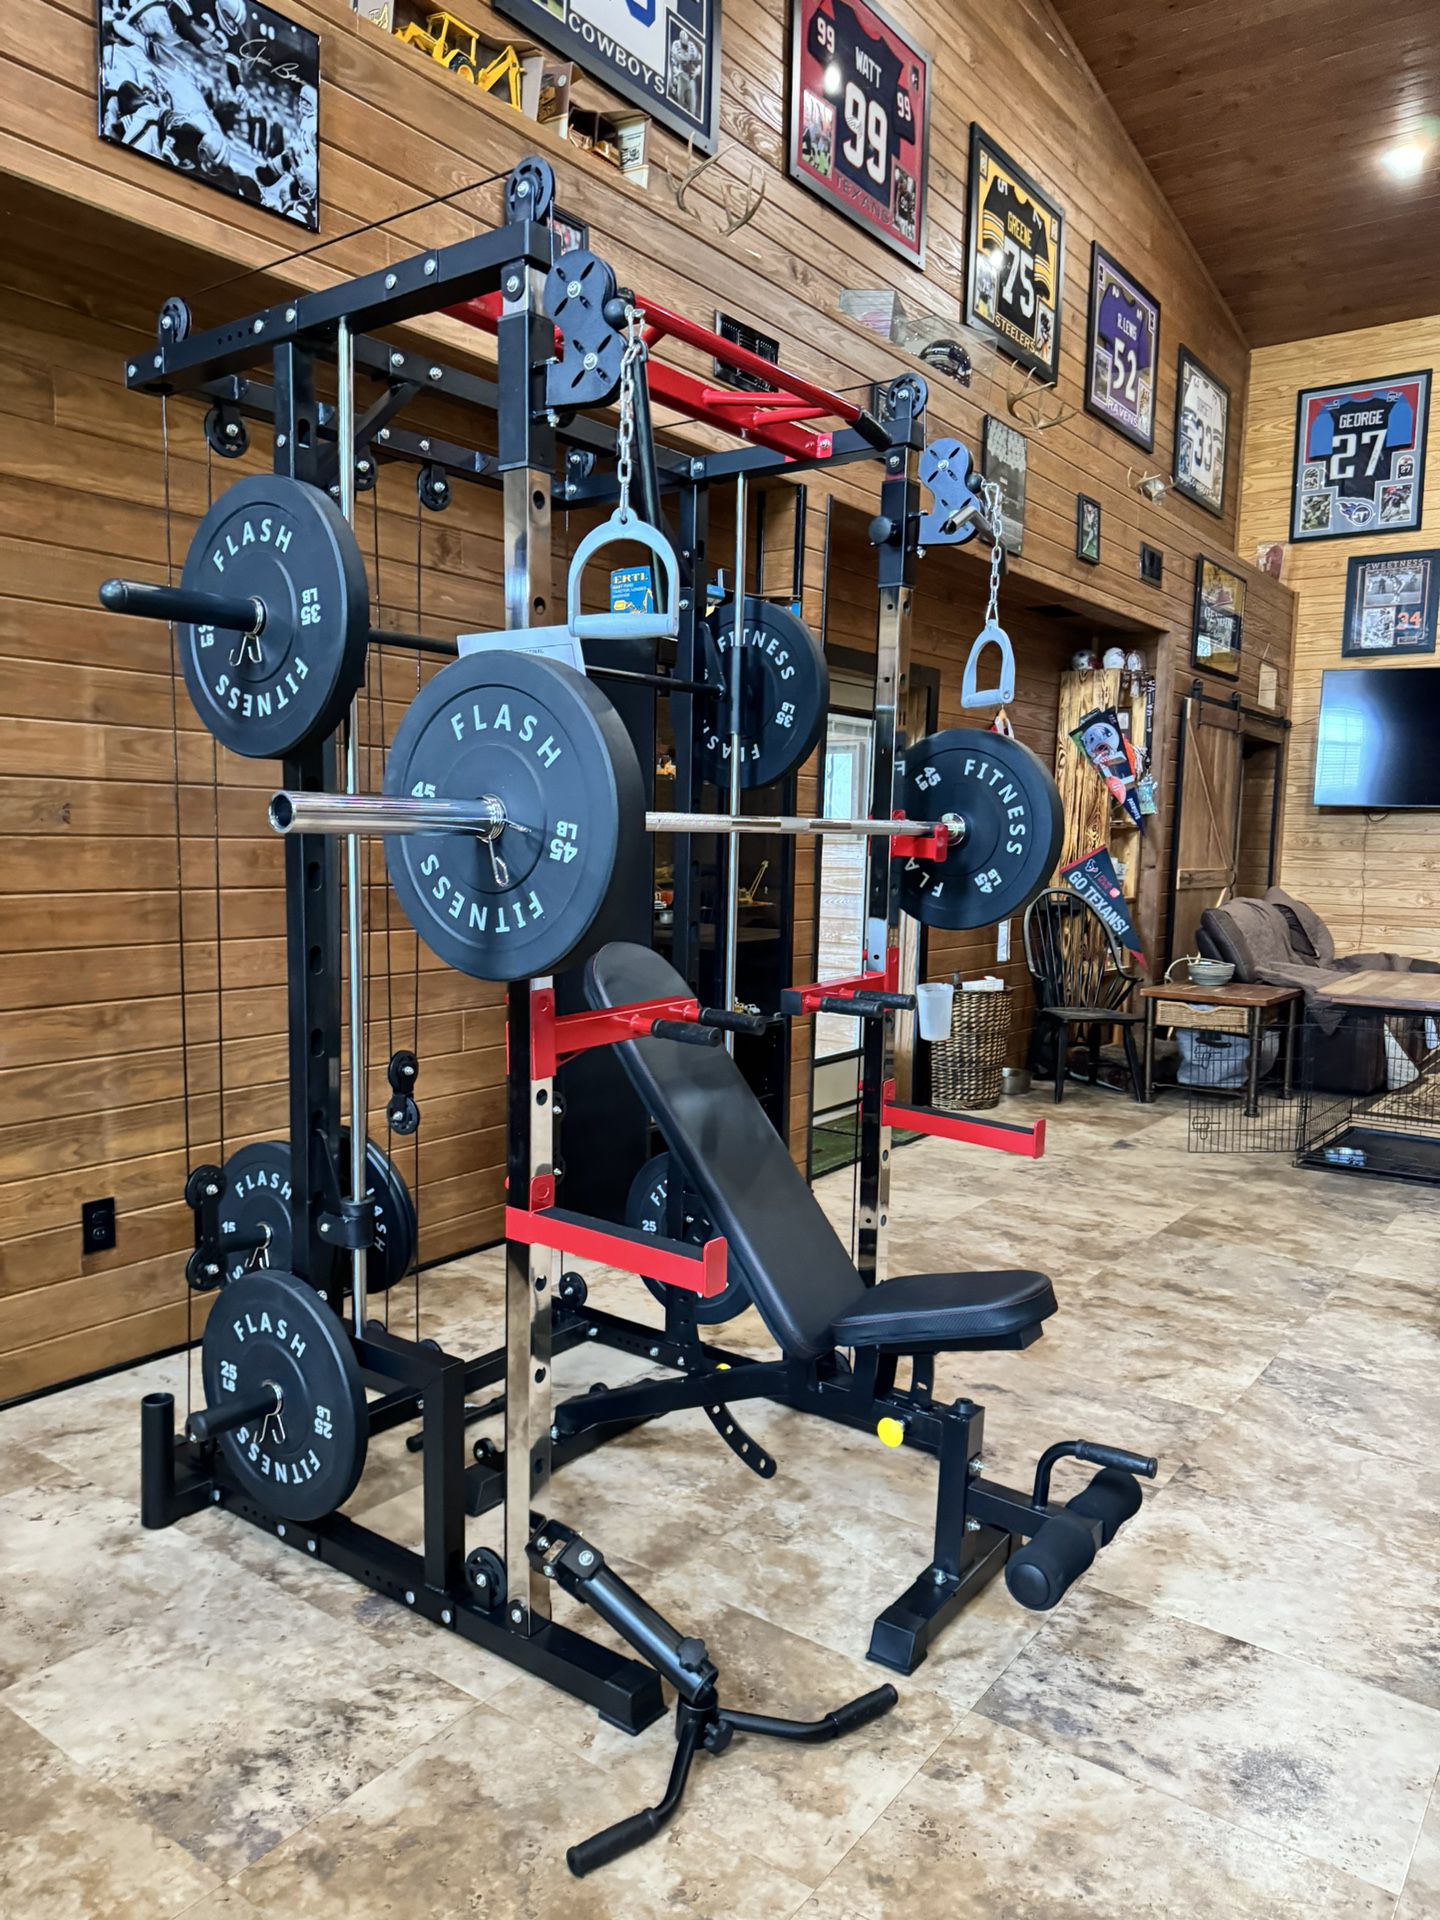 Flash F10 Smith Machine Combo Set With Weights Brand New In The Box 📦 